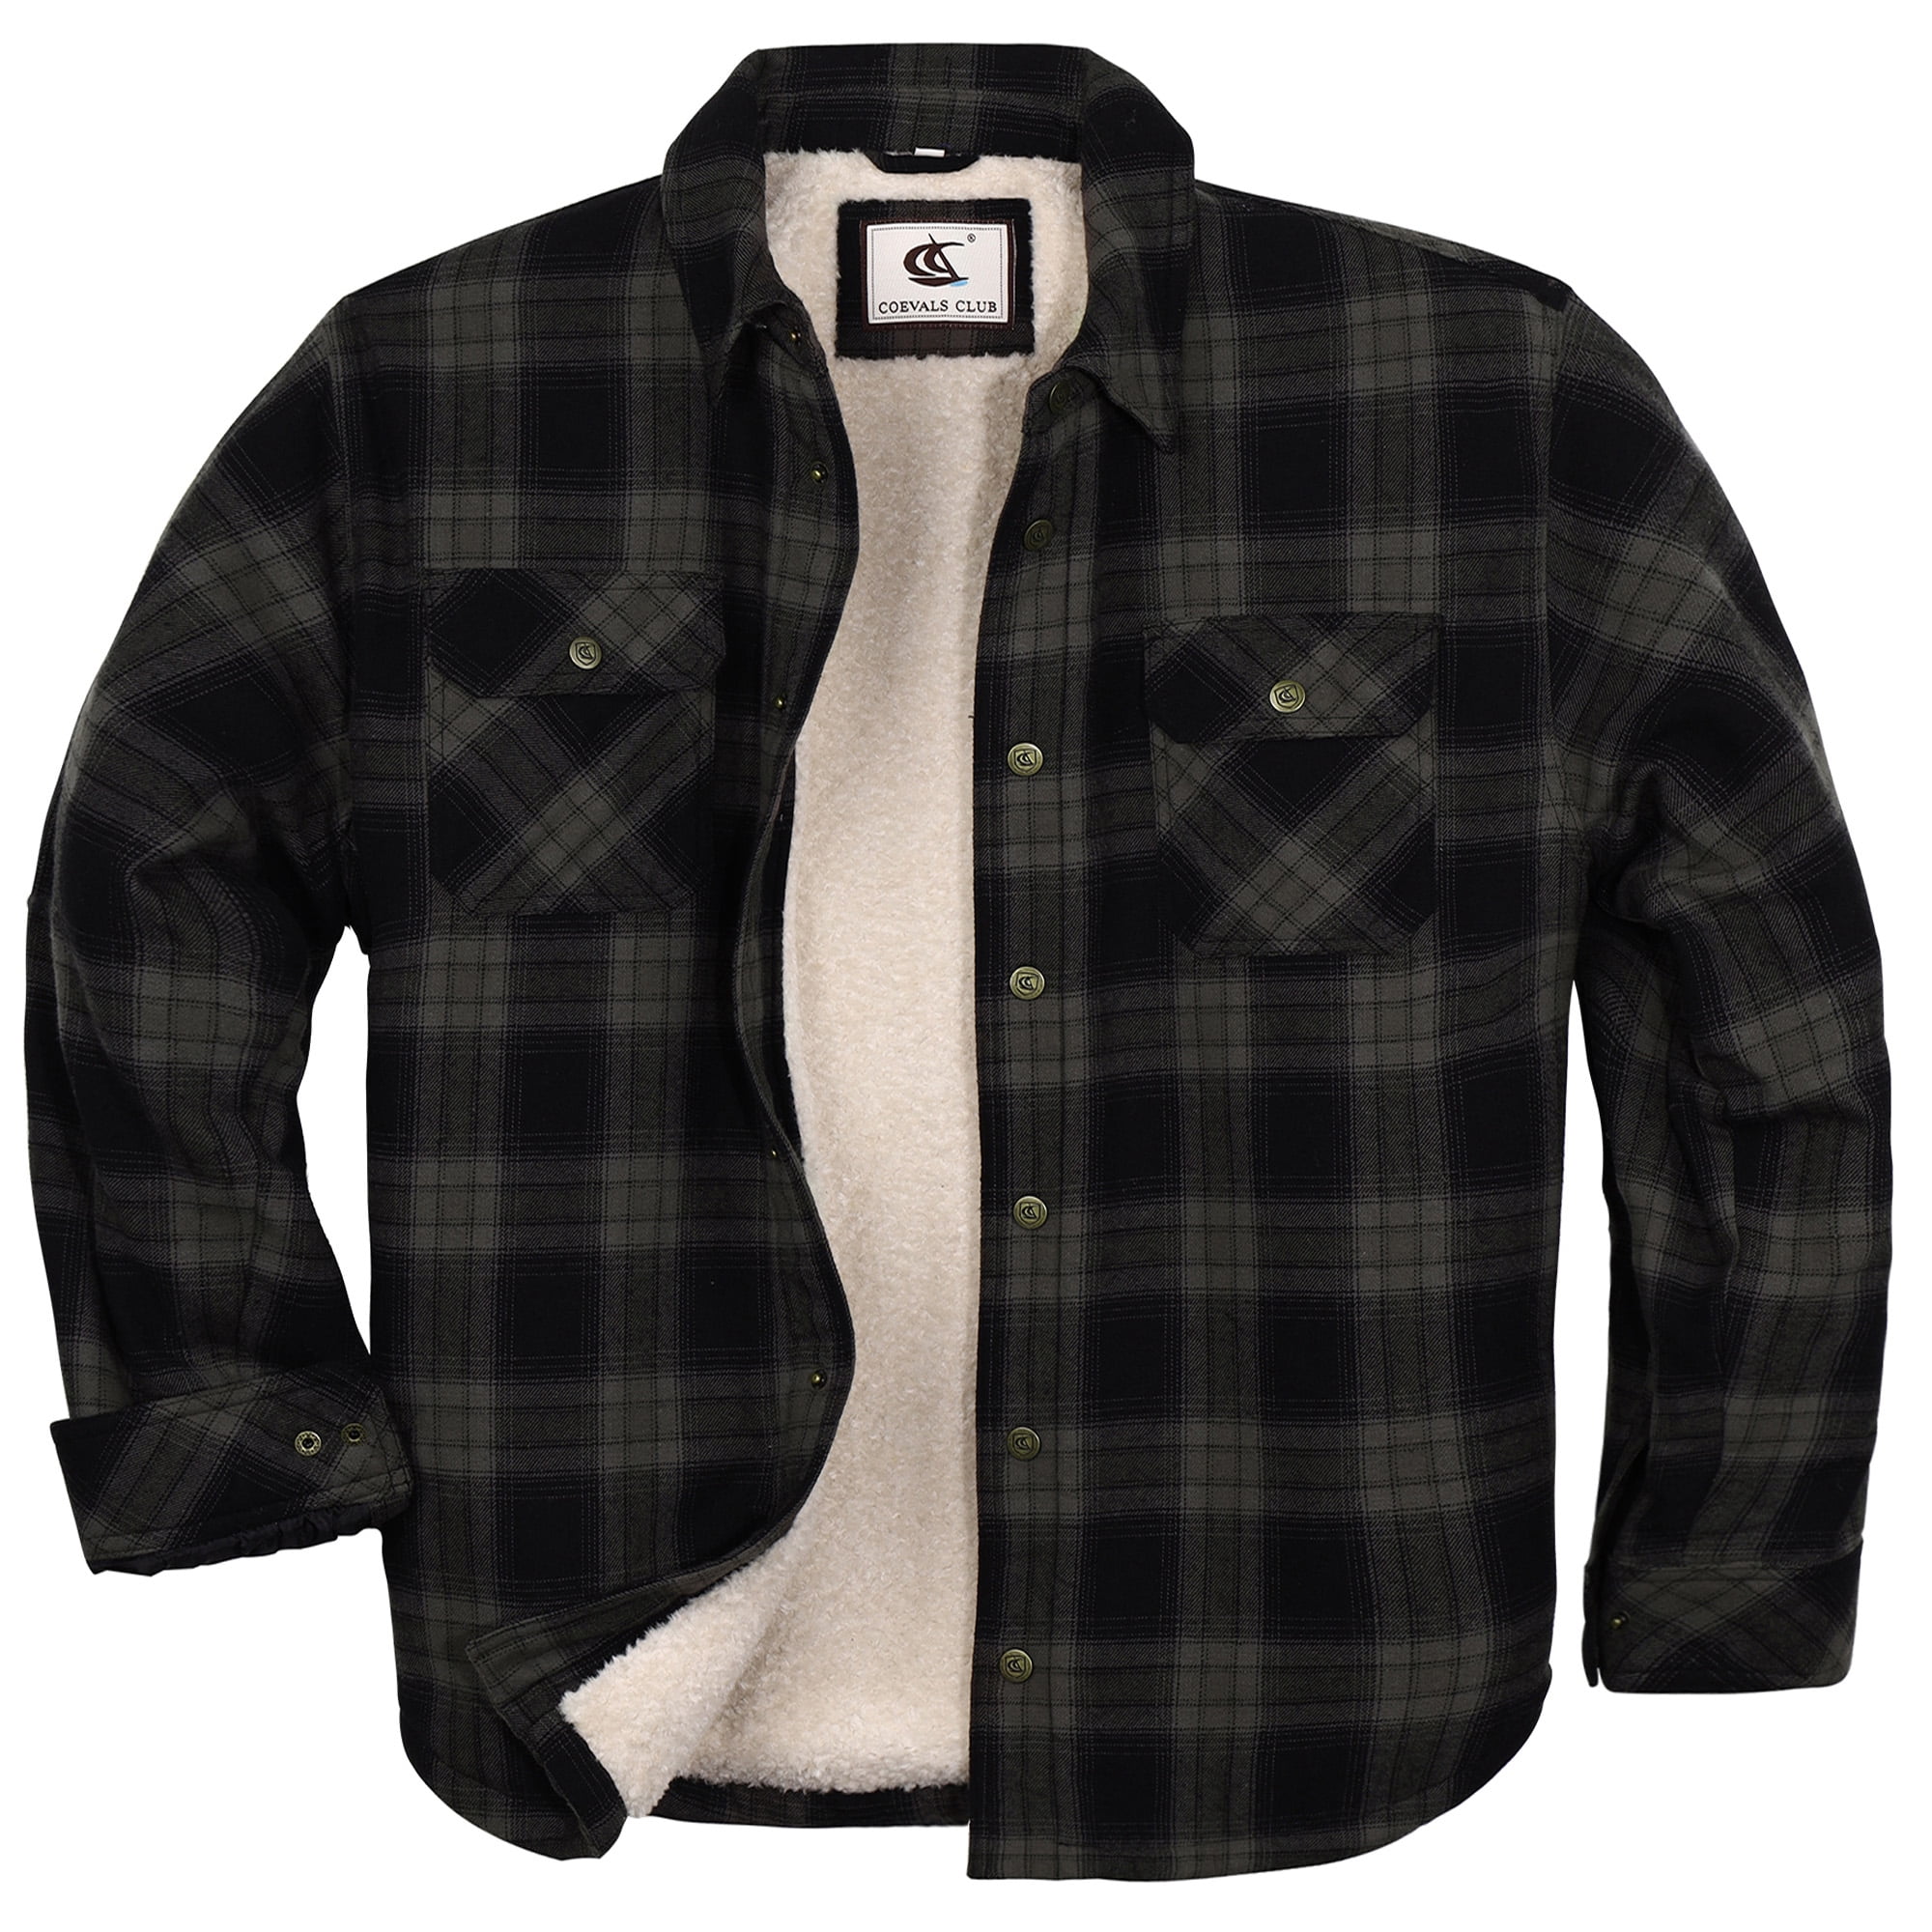 Coevals Club Men's Flannel Jacket Sherpa Lined Cotton Plaid Snap Button ...